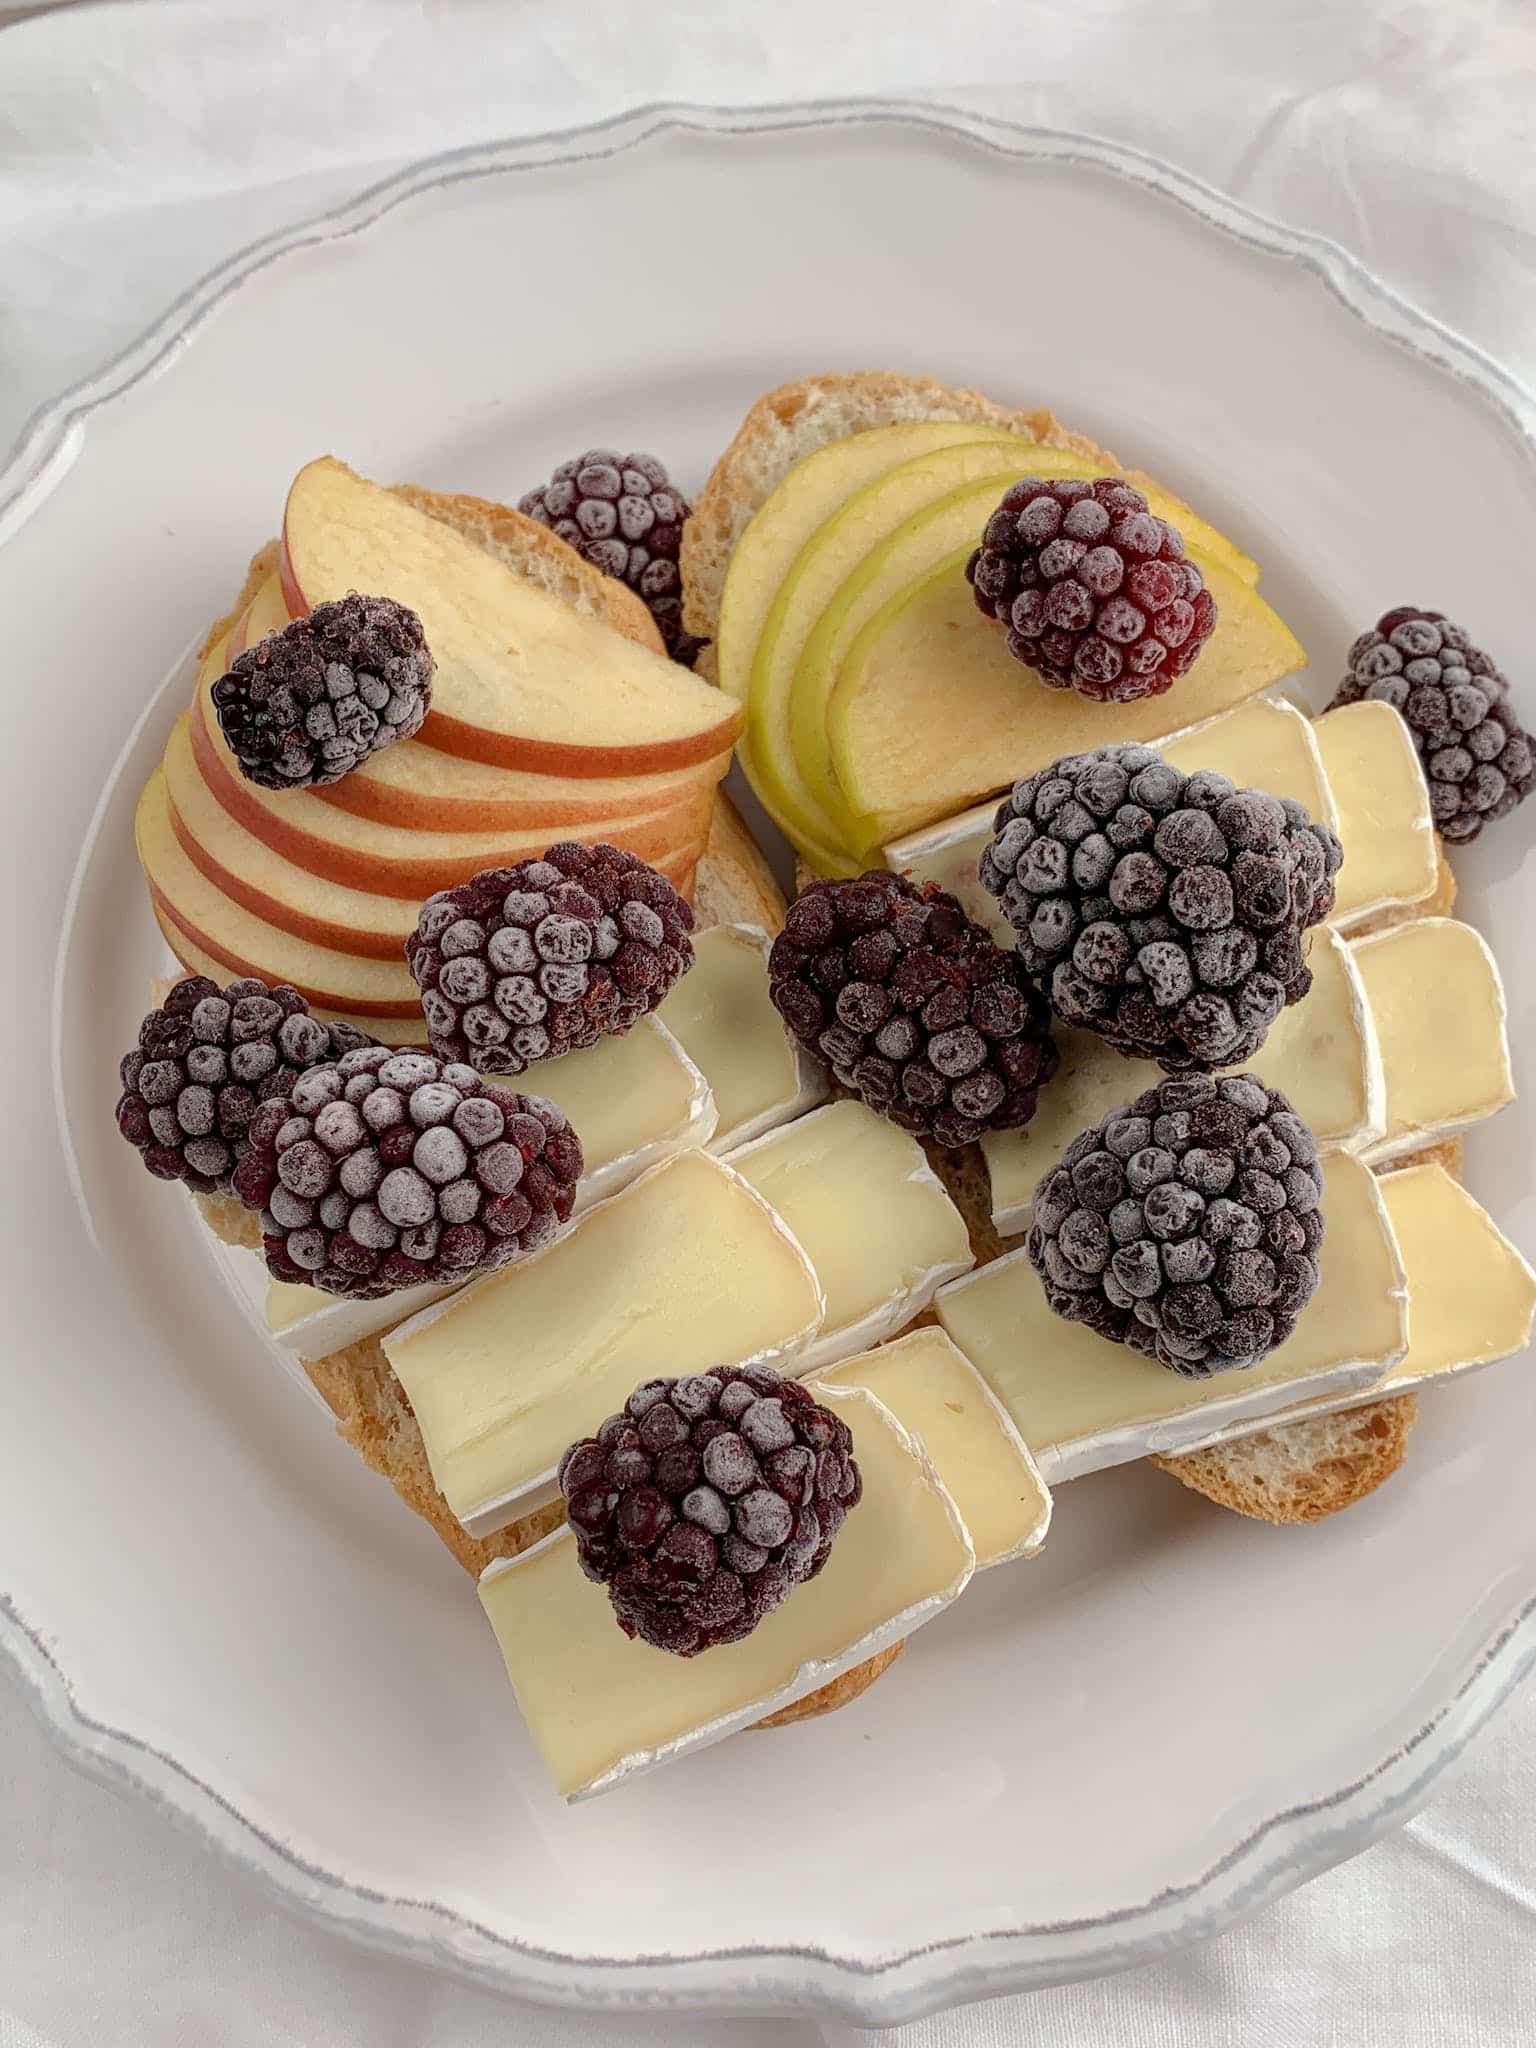 Bread with Slices of Apple and Berries on Top